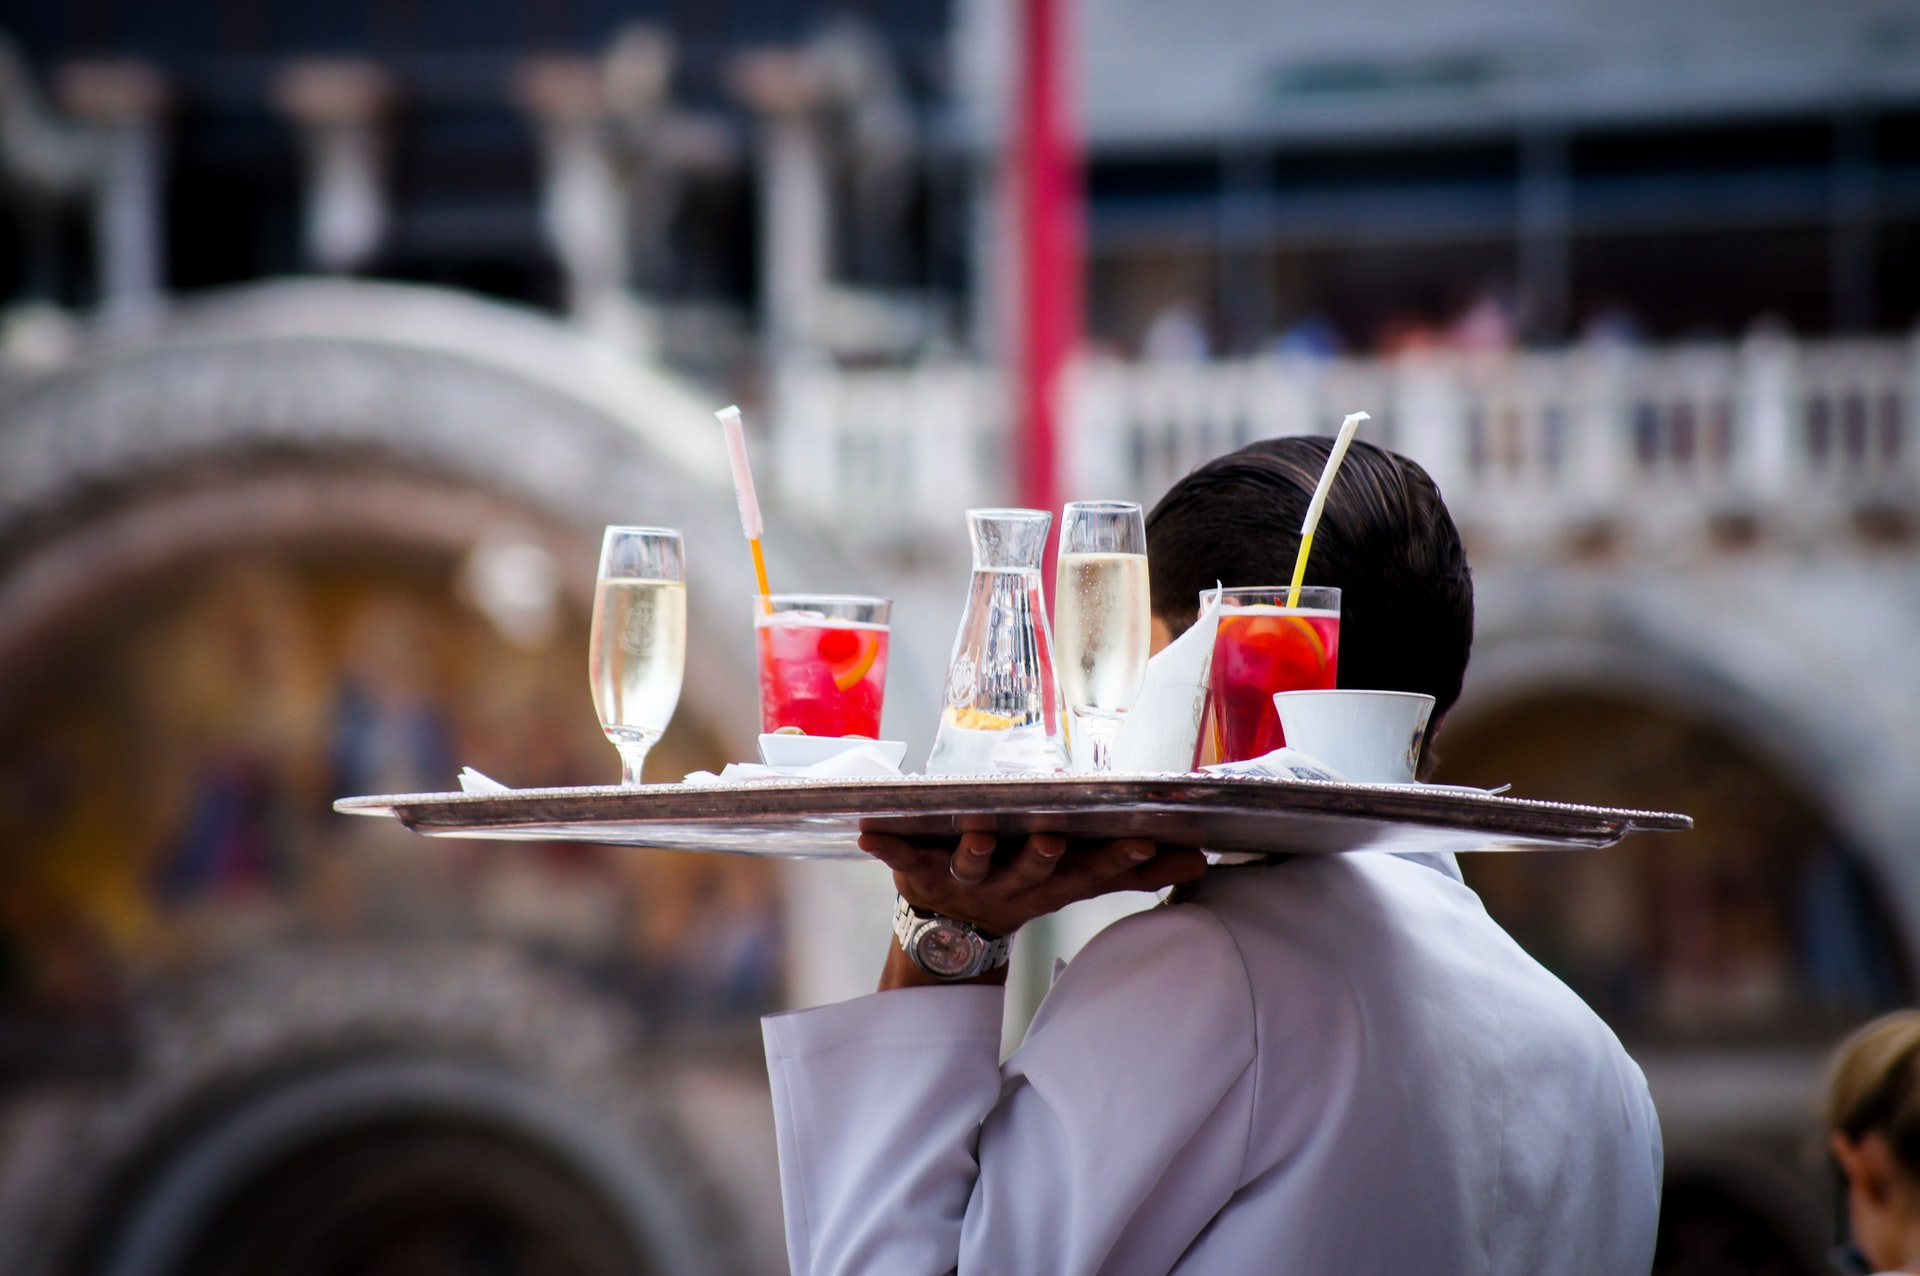 waiter carrying a tray full of drinks and cocktails